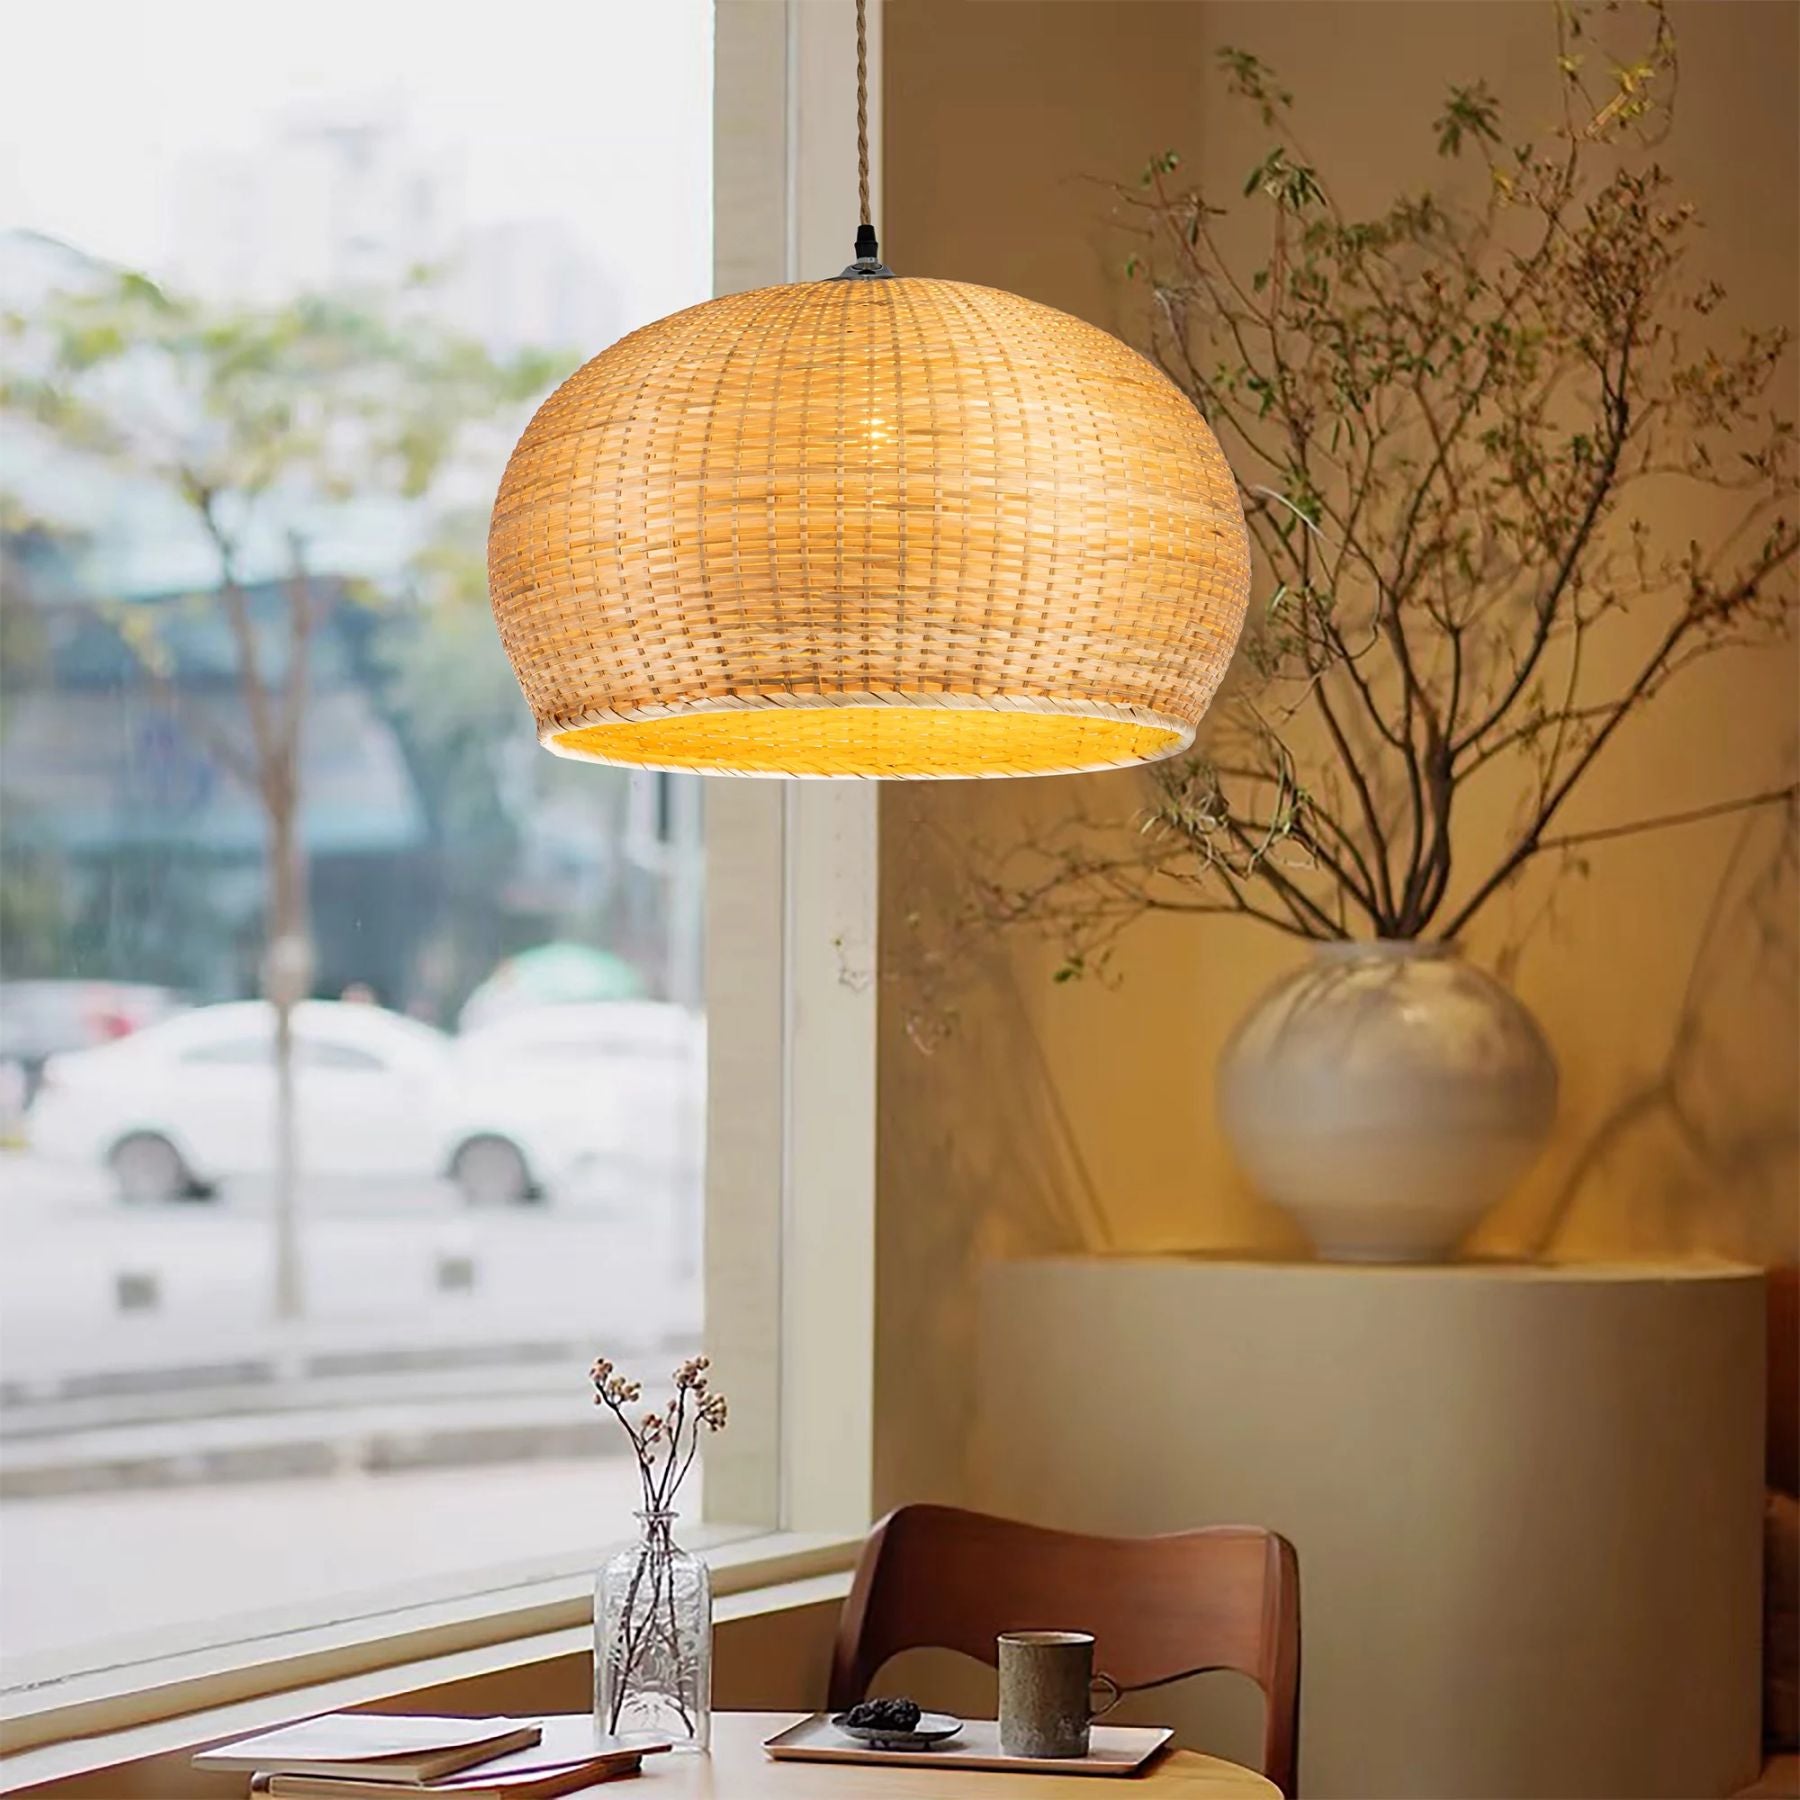 hanging lights with a bell shaped design are often used in restaurants or minimalist